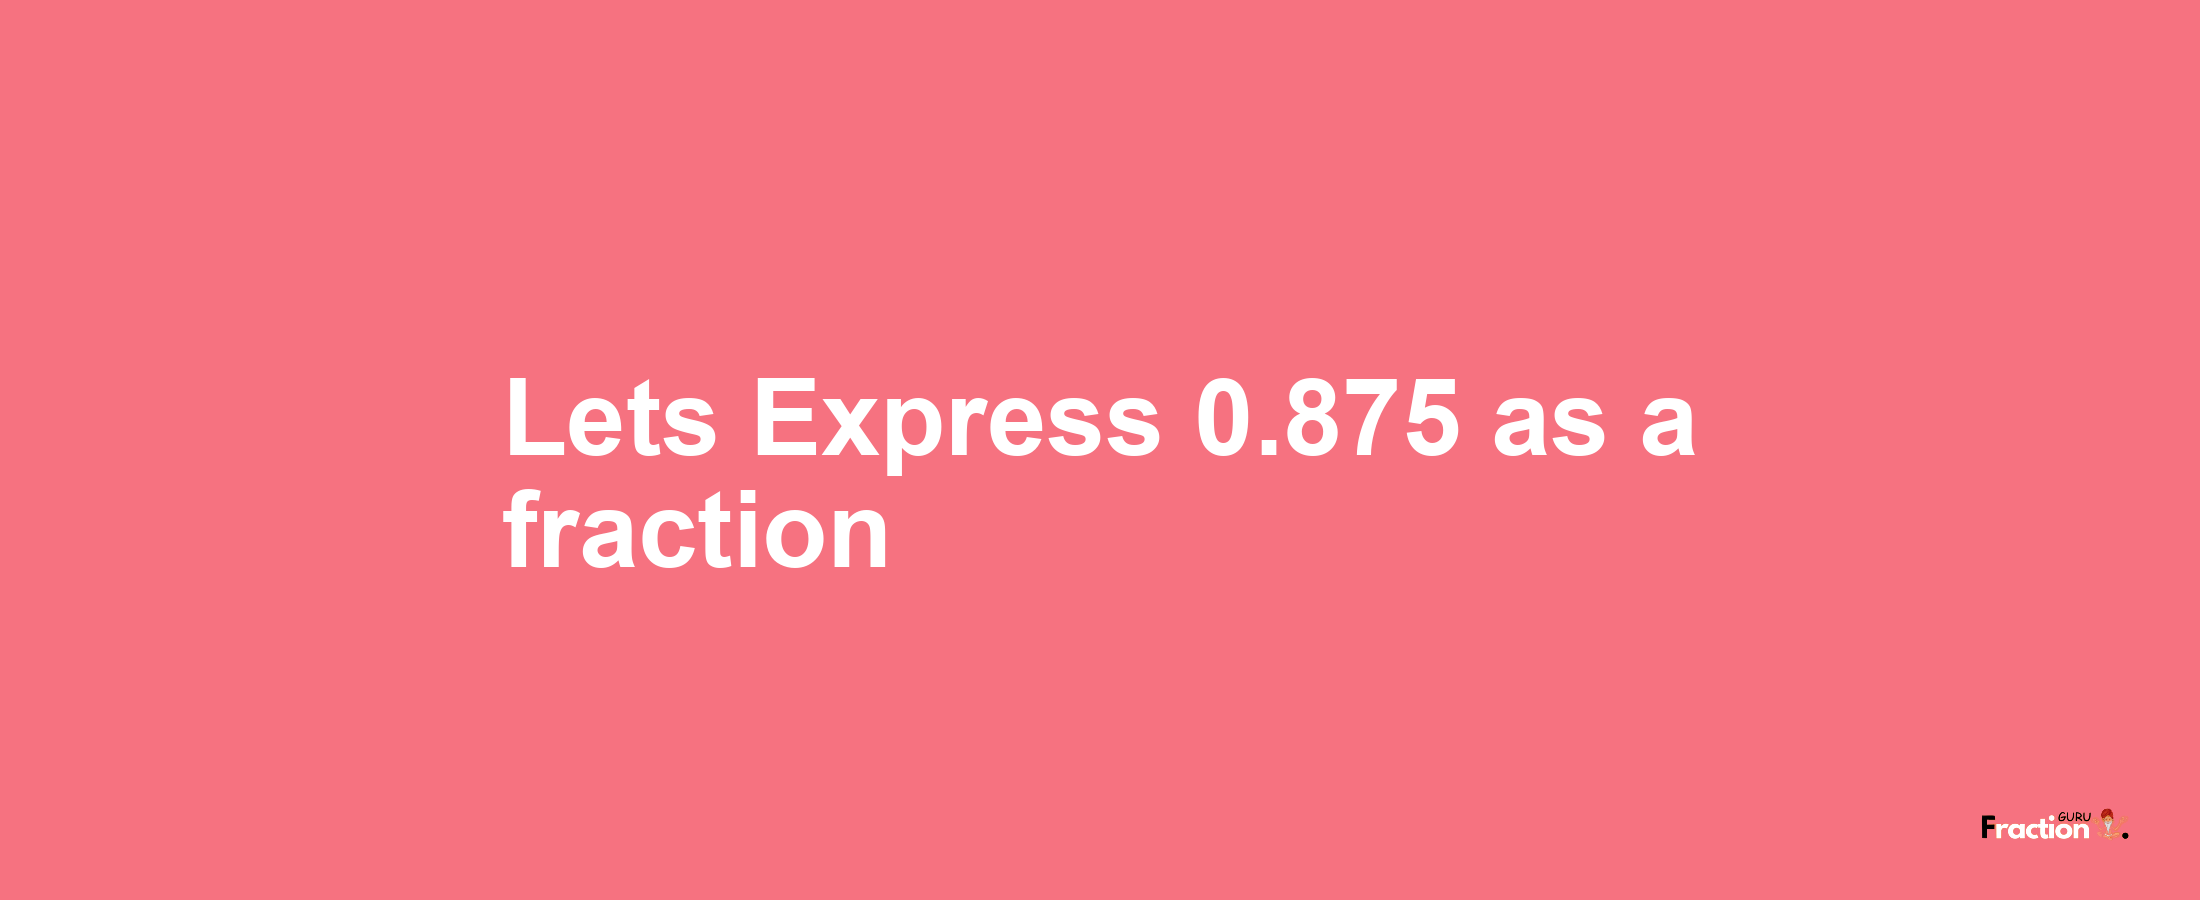 Lets Express 0.875 as afraction